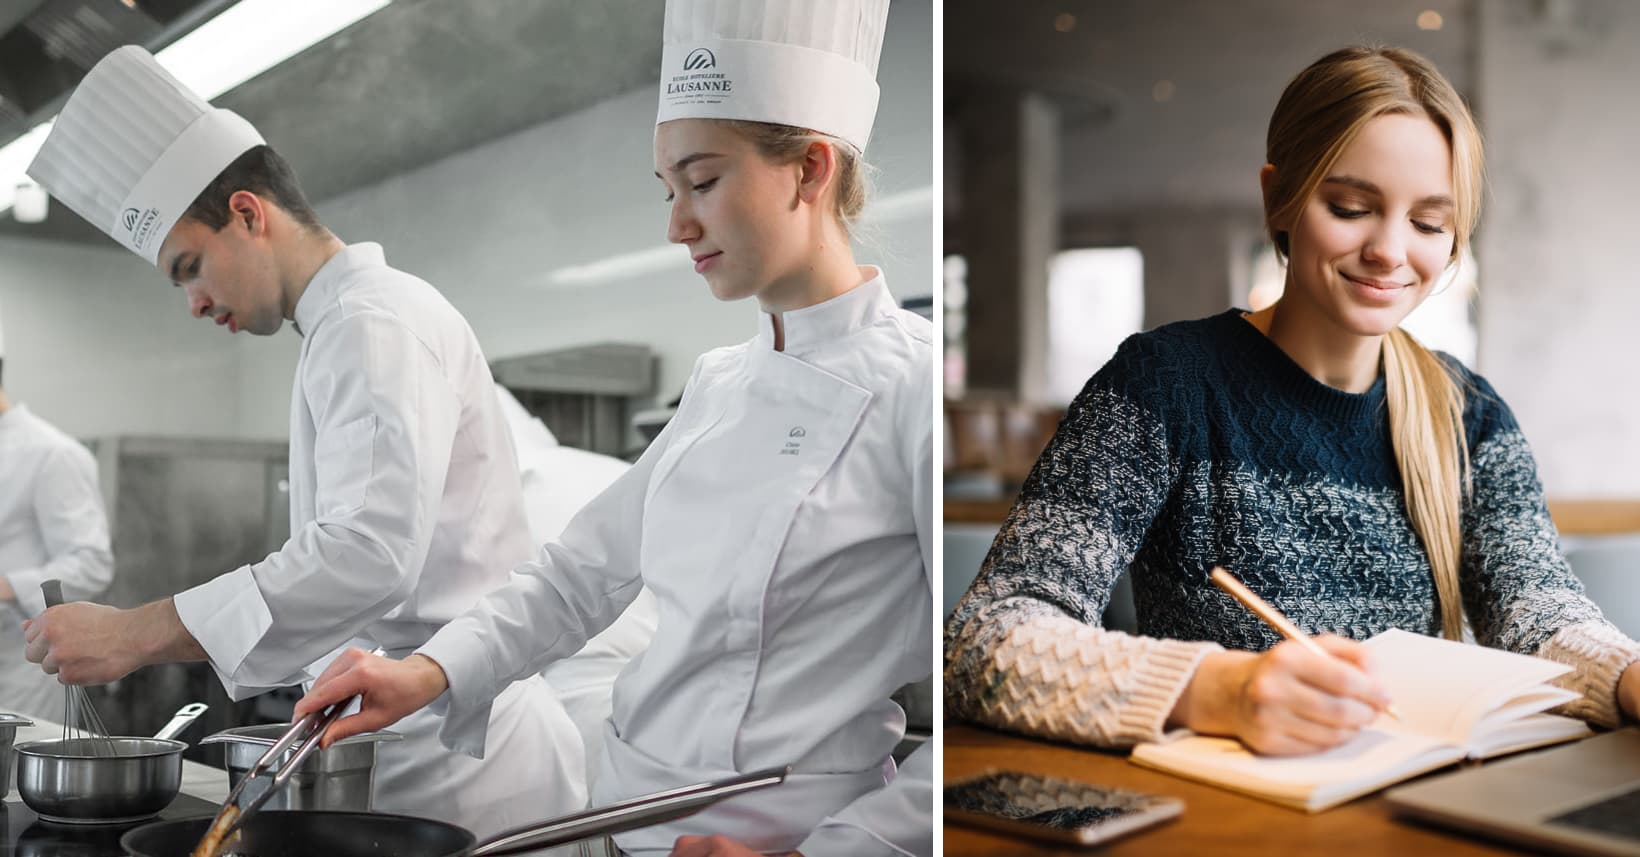 Degree in Hospitality Management: Mixing theory and practice